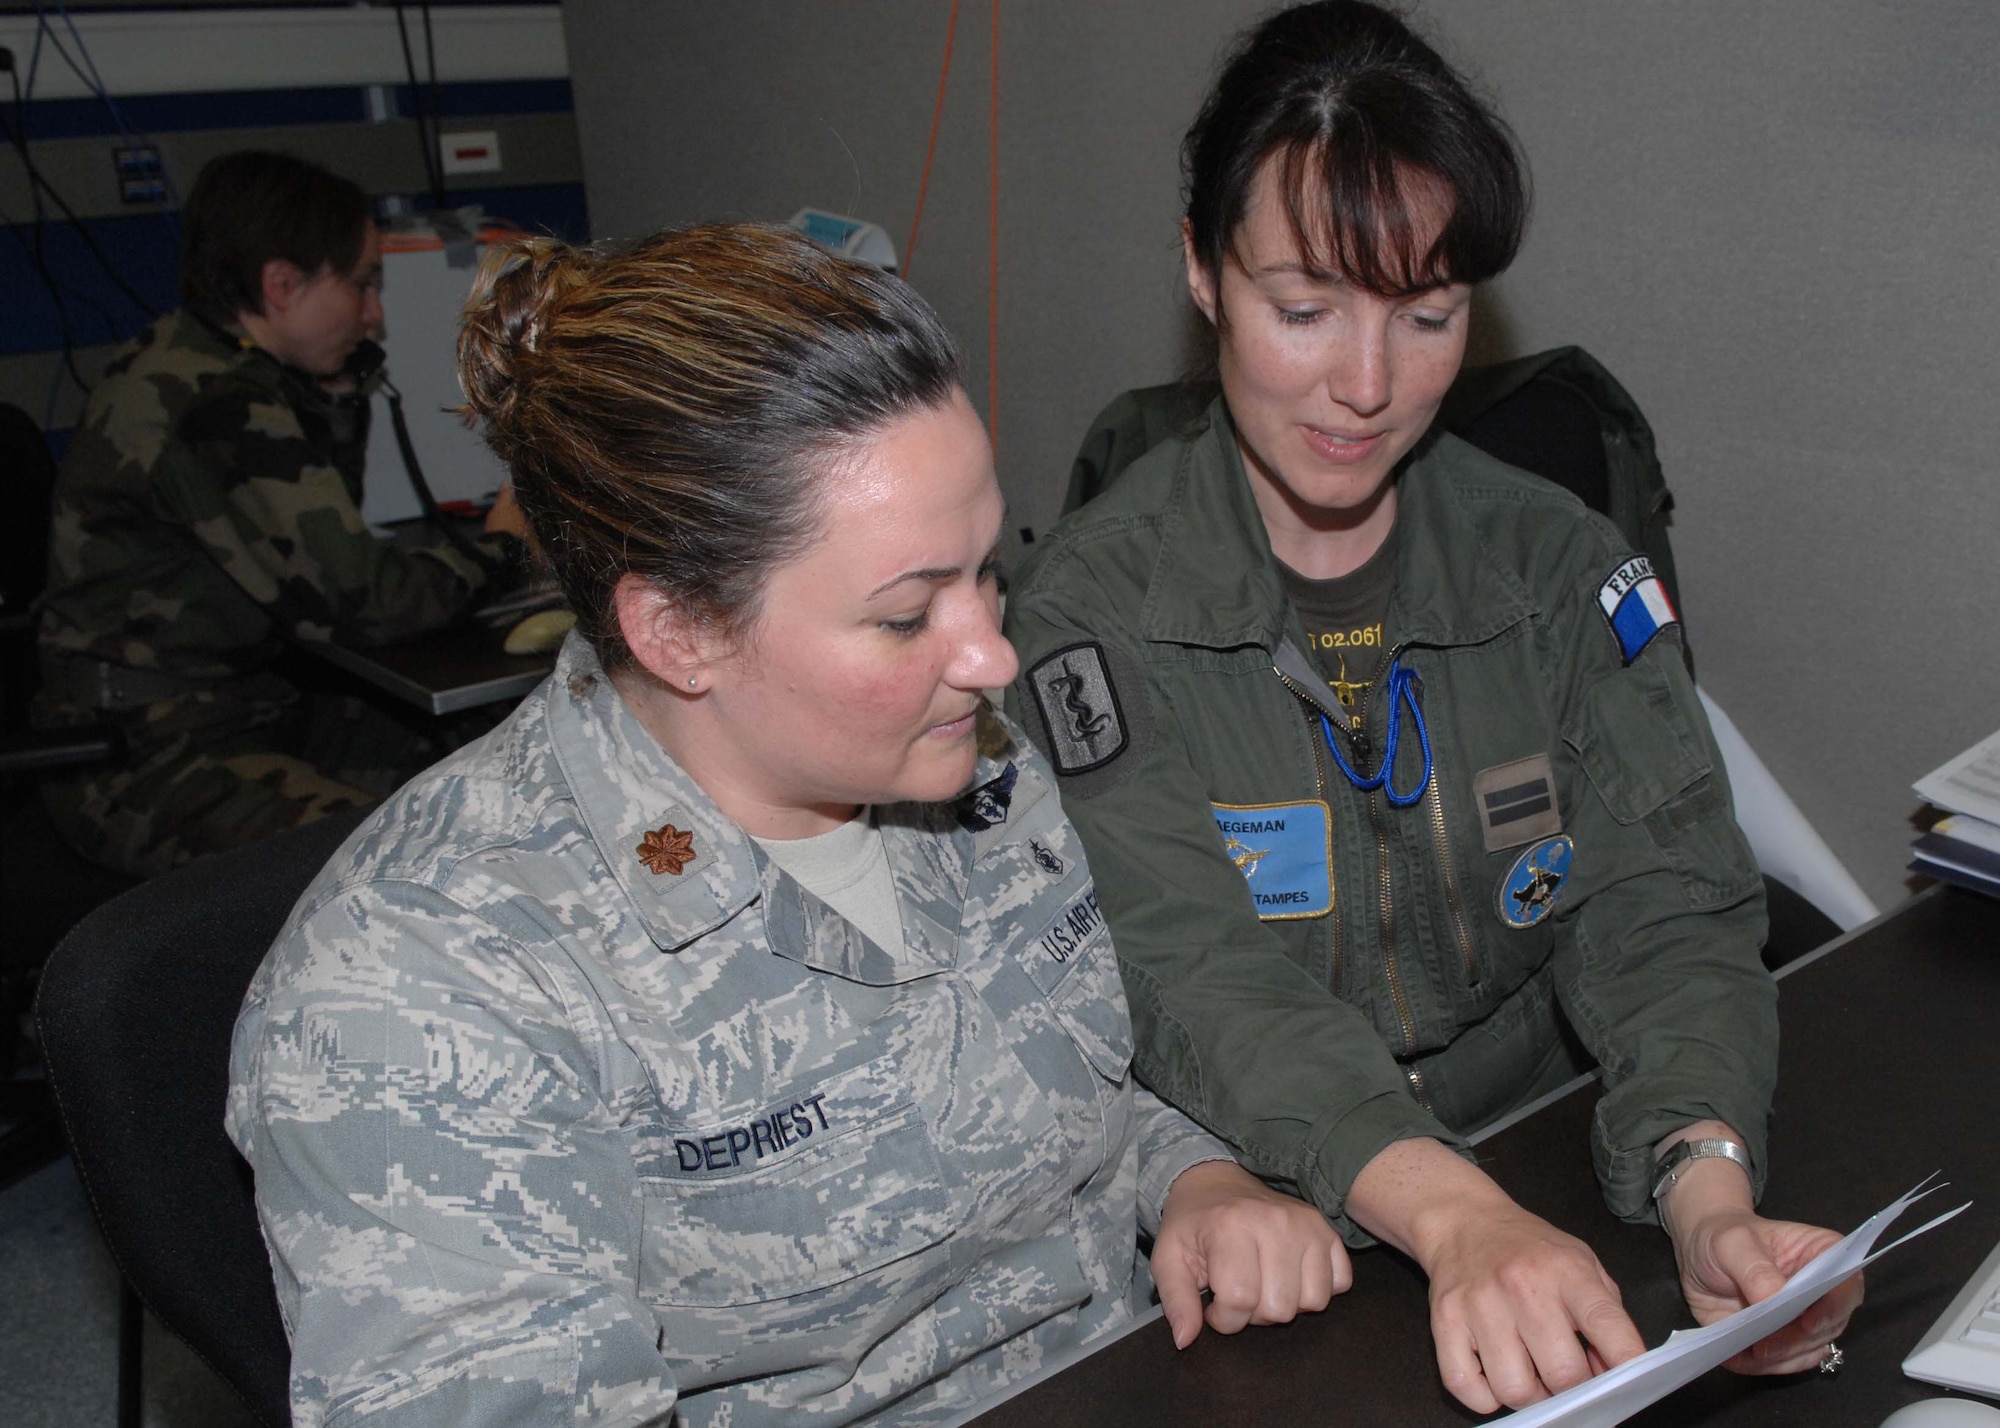 Eisiedlerhof Air Station, Germany--French Air Force 1st Lt. Emmanuelle Waegeman provides Maj. Dawn DePriest with an operational update during the U.S. European Command's premier exercise.  The exercise united U.S., French, and Polish forces as part of a combined task force. (U.S. Air Force photo by Senior Airman Kirsten Sisson)  